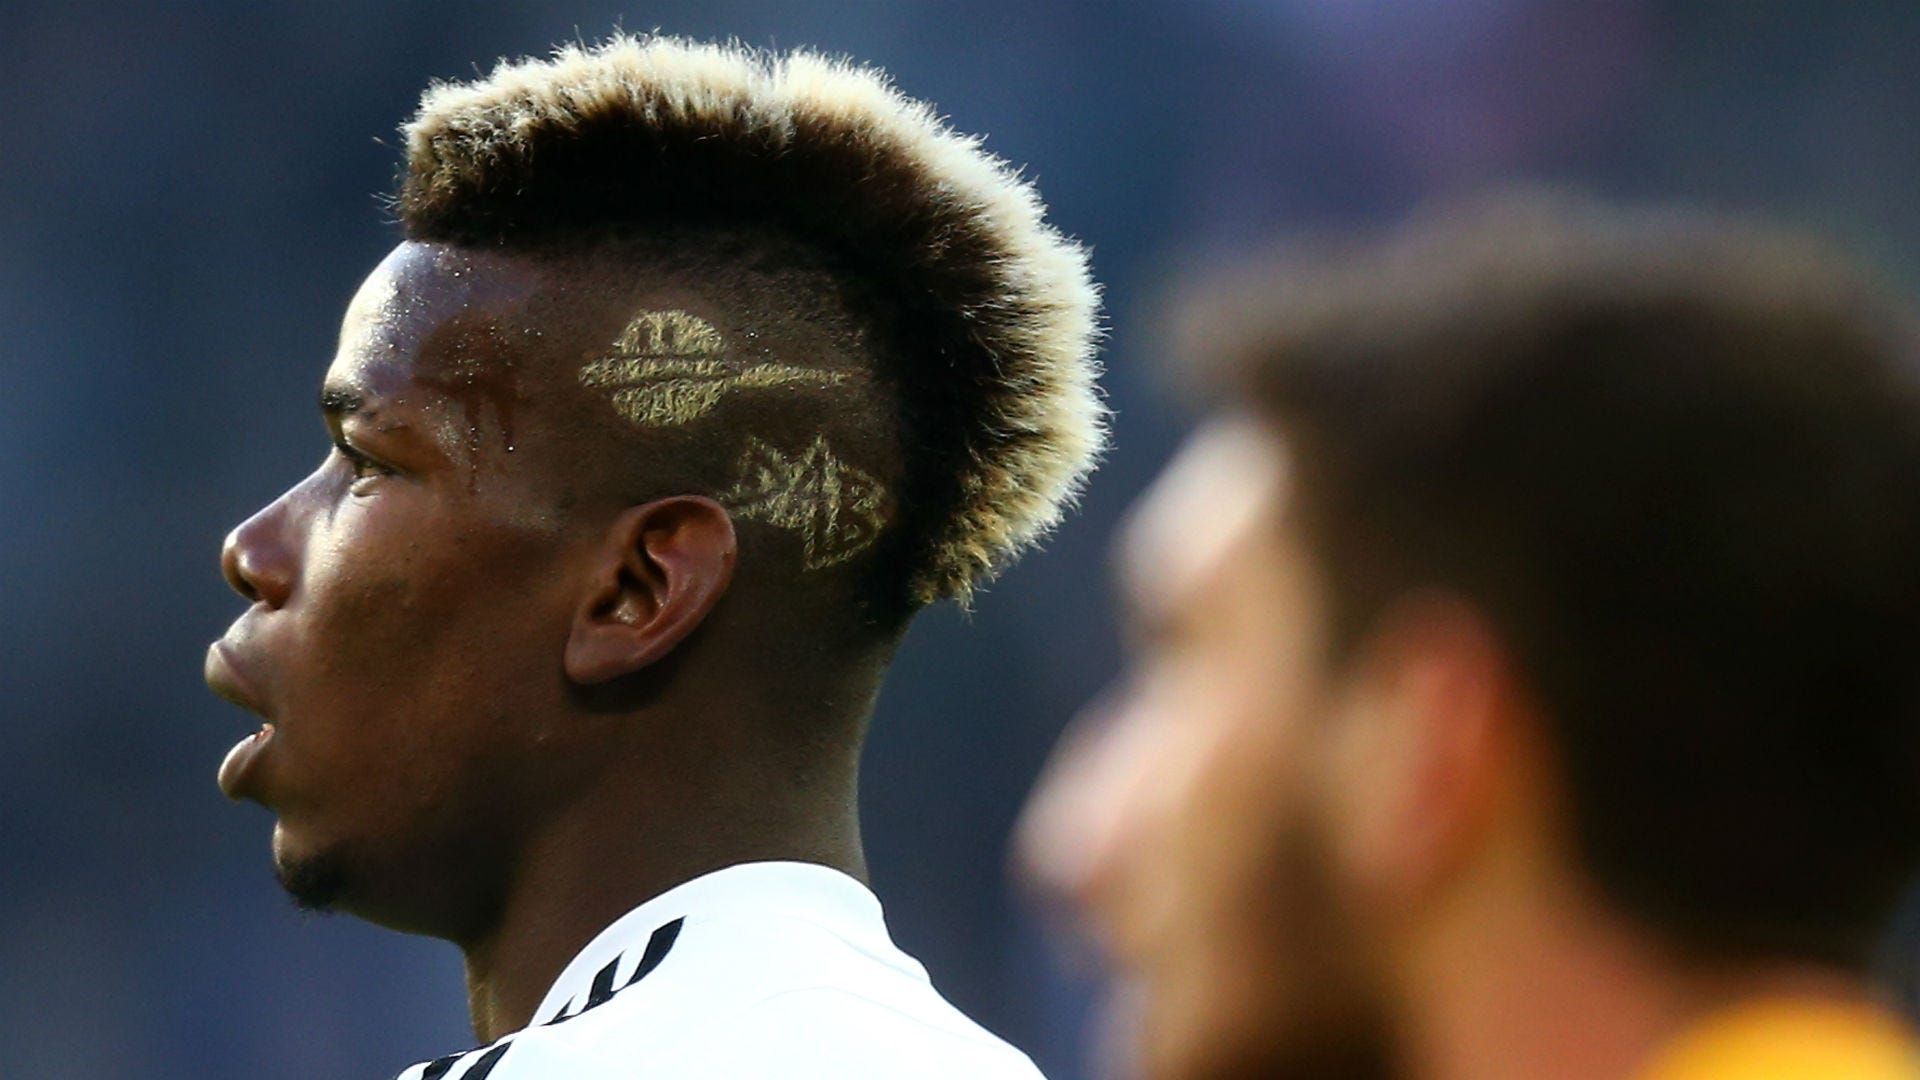 Paul Pogba gets new haircut inspired by France national team  Neo Prime  Sport